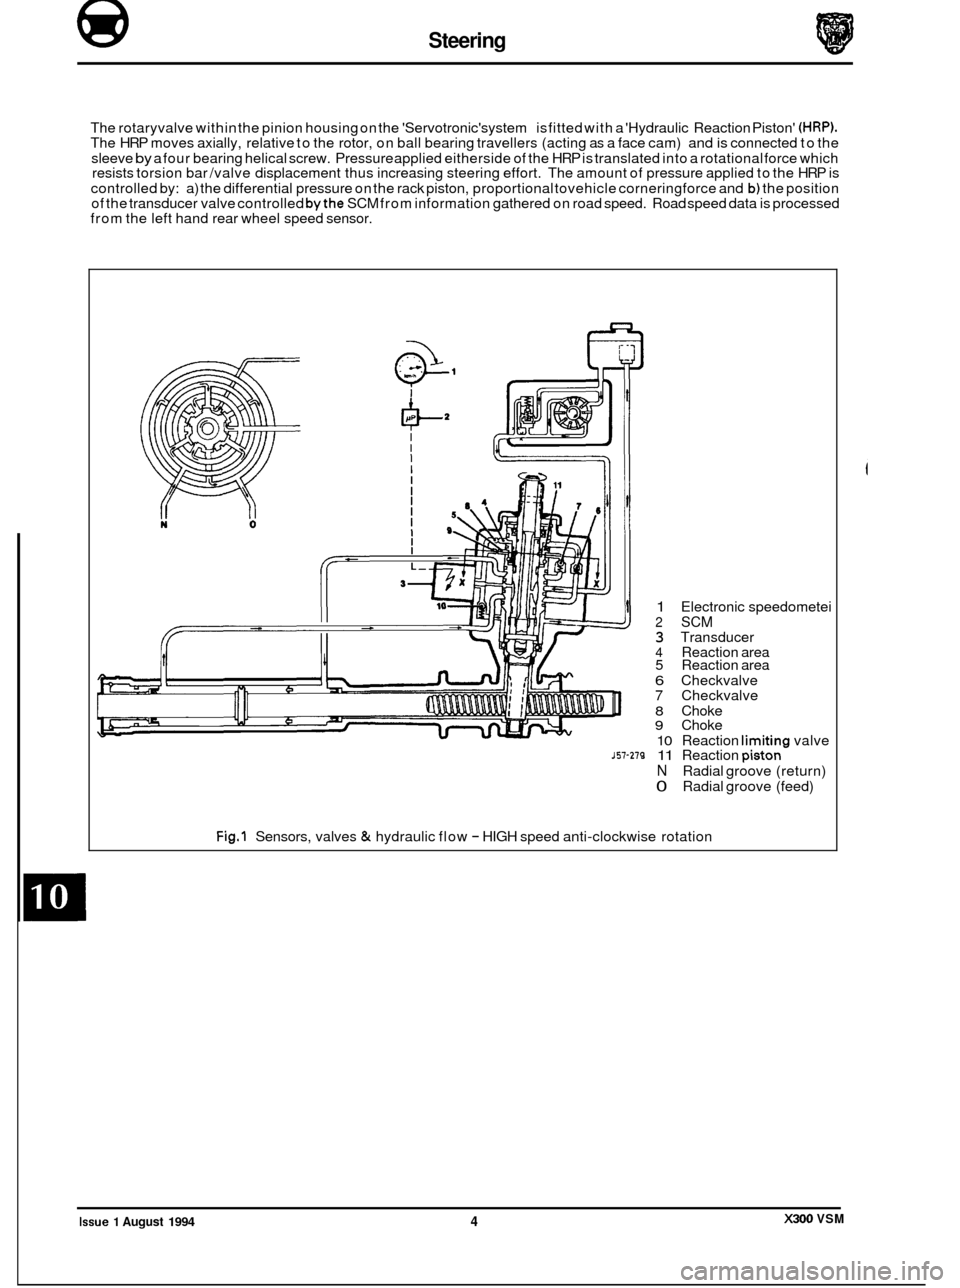 JAGUAR XJ6 1994 2.G Workshop Manual @ Steering 
The rotaryvalve  within the pinion housing  on the  Servotronicsystem  is fitted with a Hydraulic  Reaction Piston (HRP). The  HRP  moves  axially,  relative  to the  rotor,  on ball  